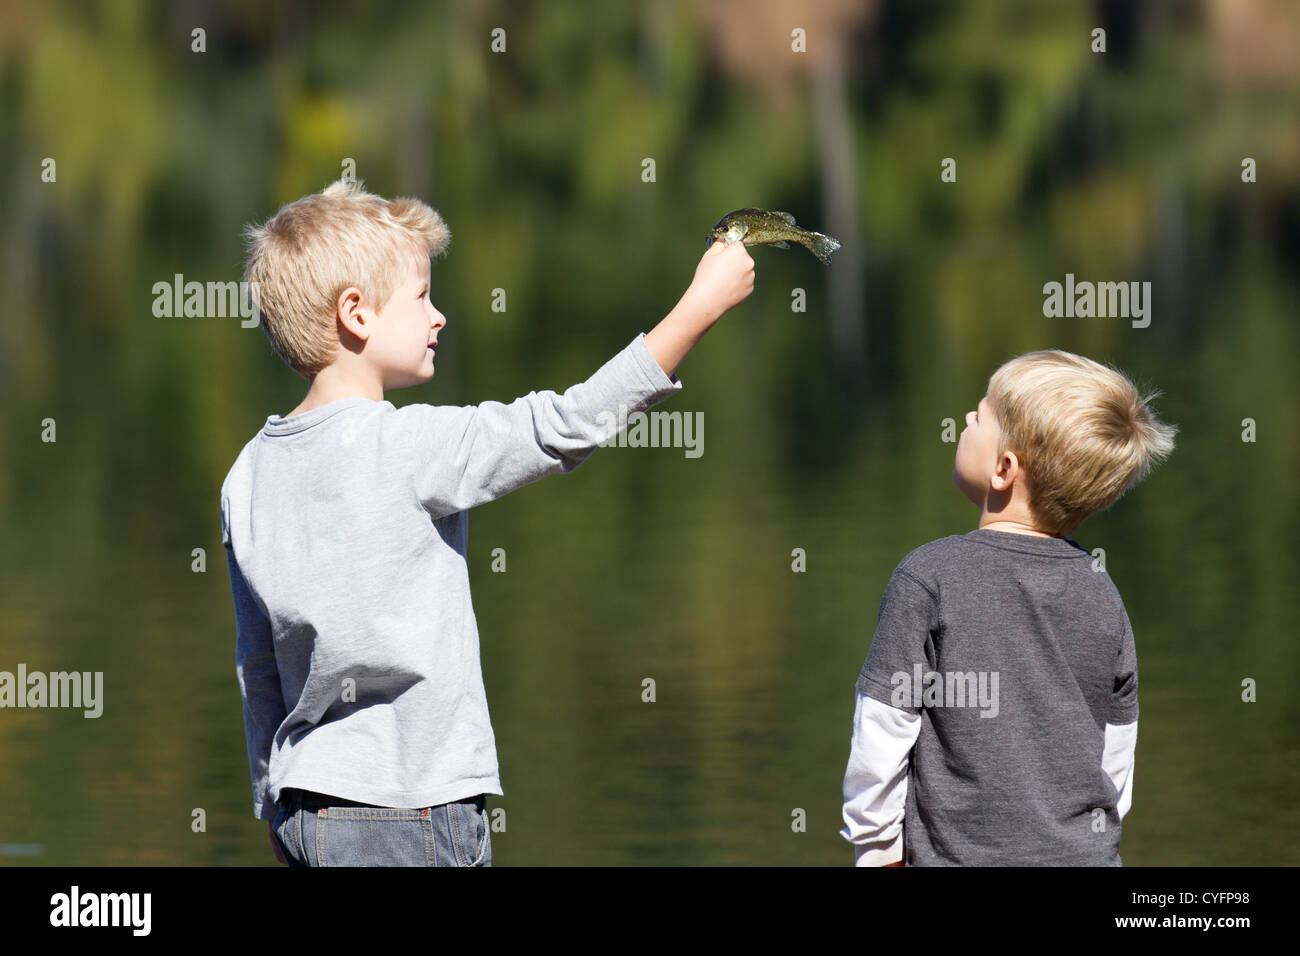 Two young blond boys fishing, Stock Photo